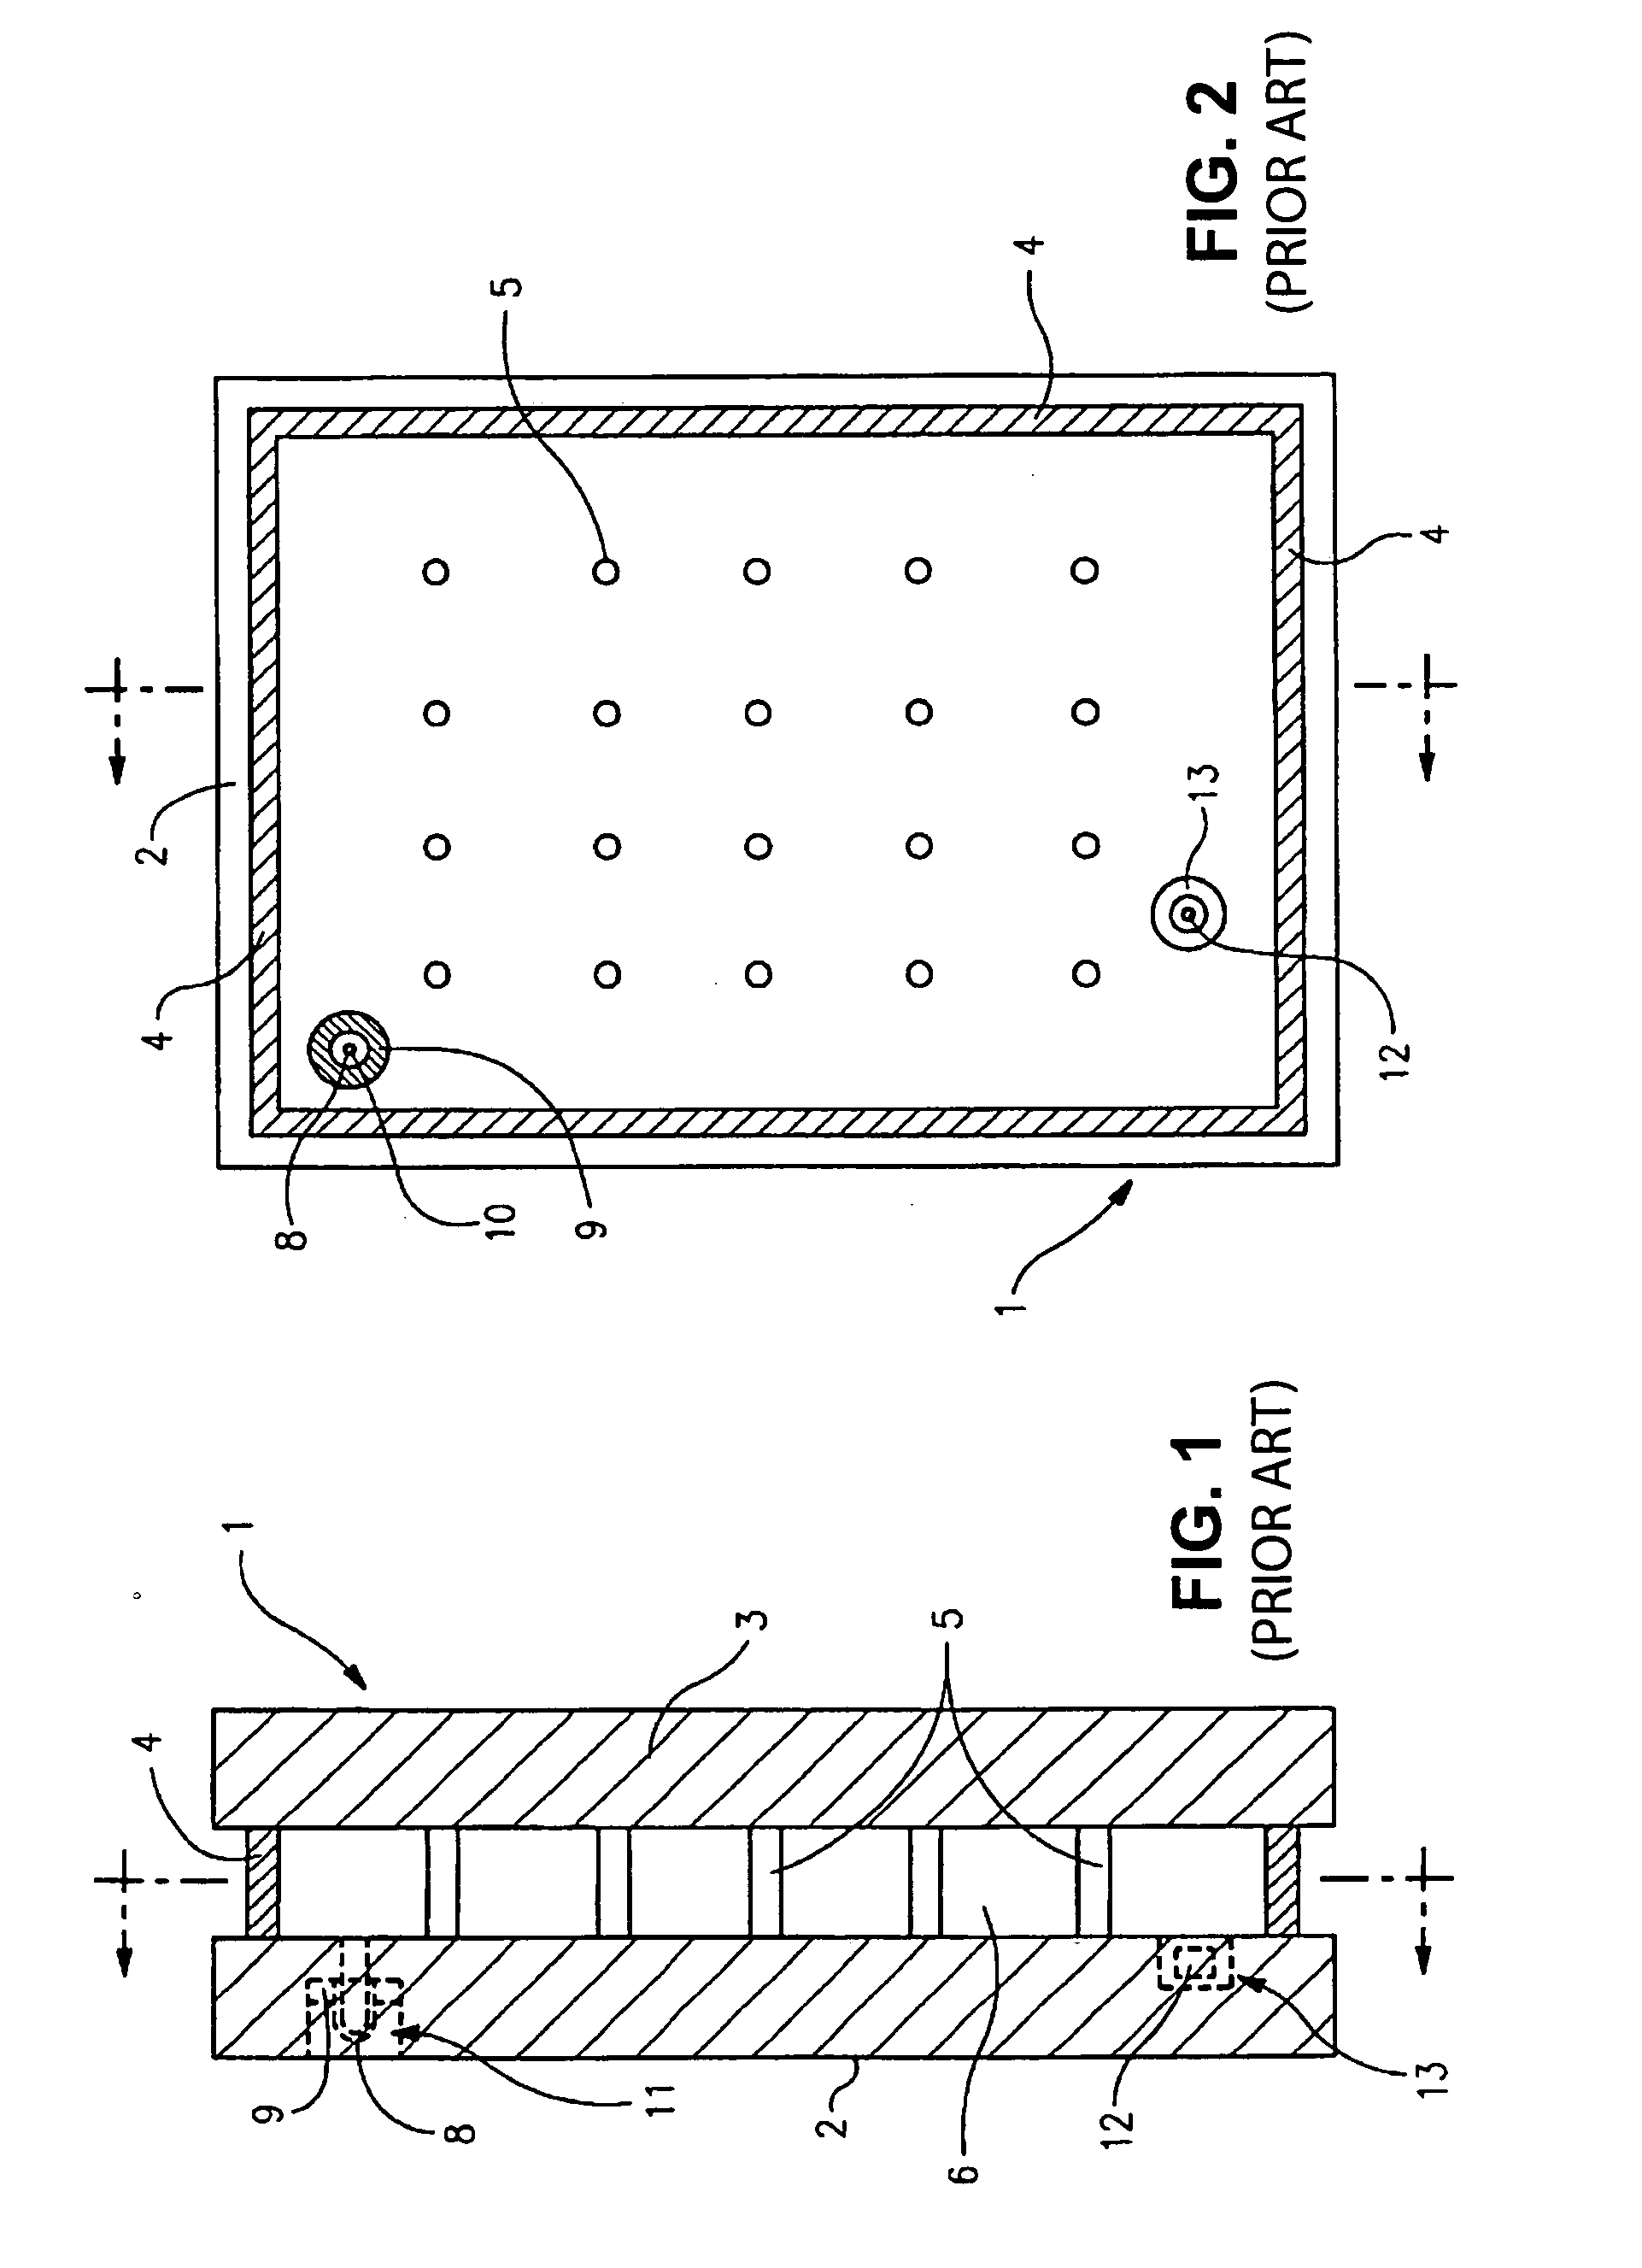 Localized heating techniques incorporating tunable infrared element(s) for vacuum insulating glass units, and/or apparatuses for same